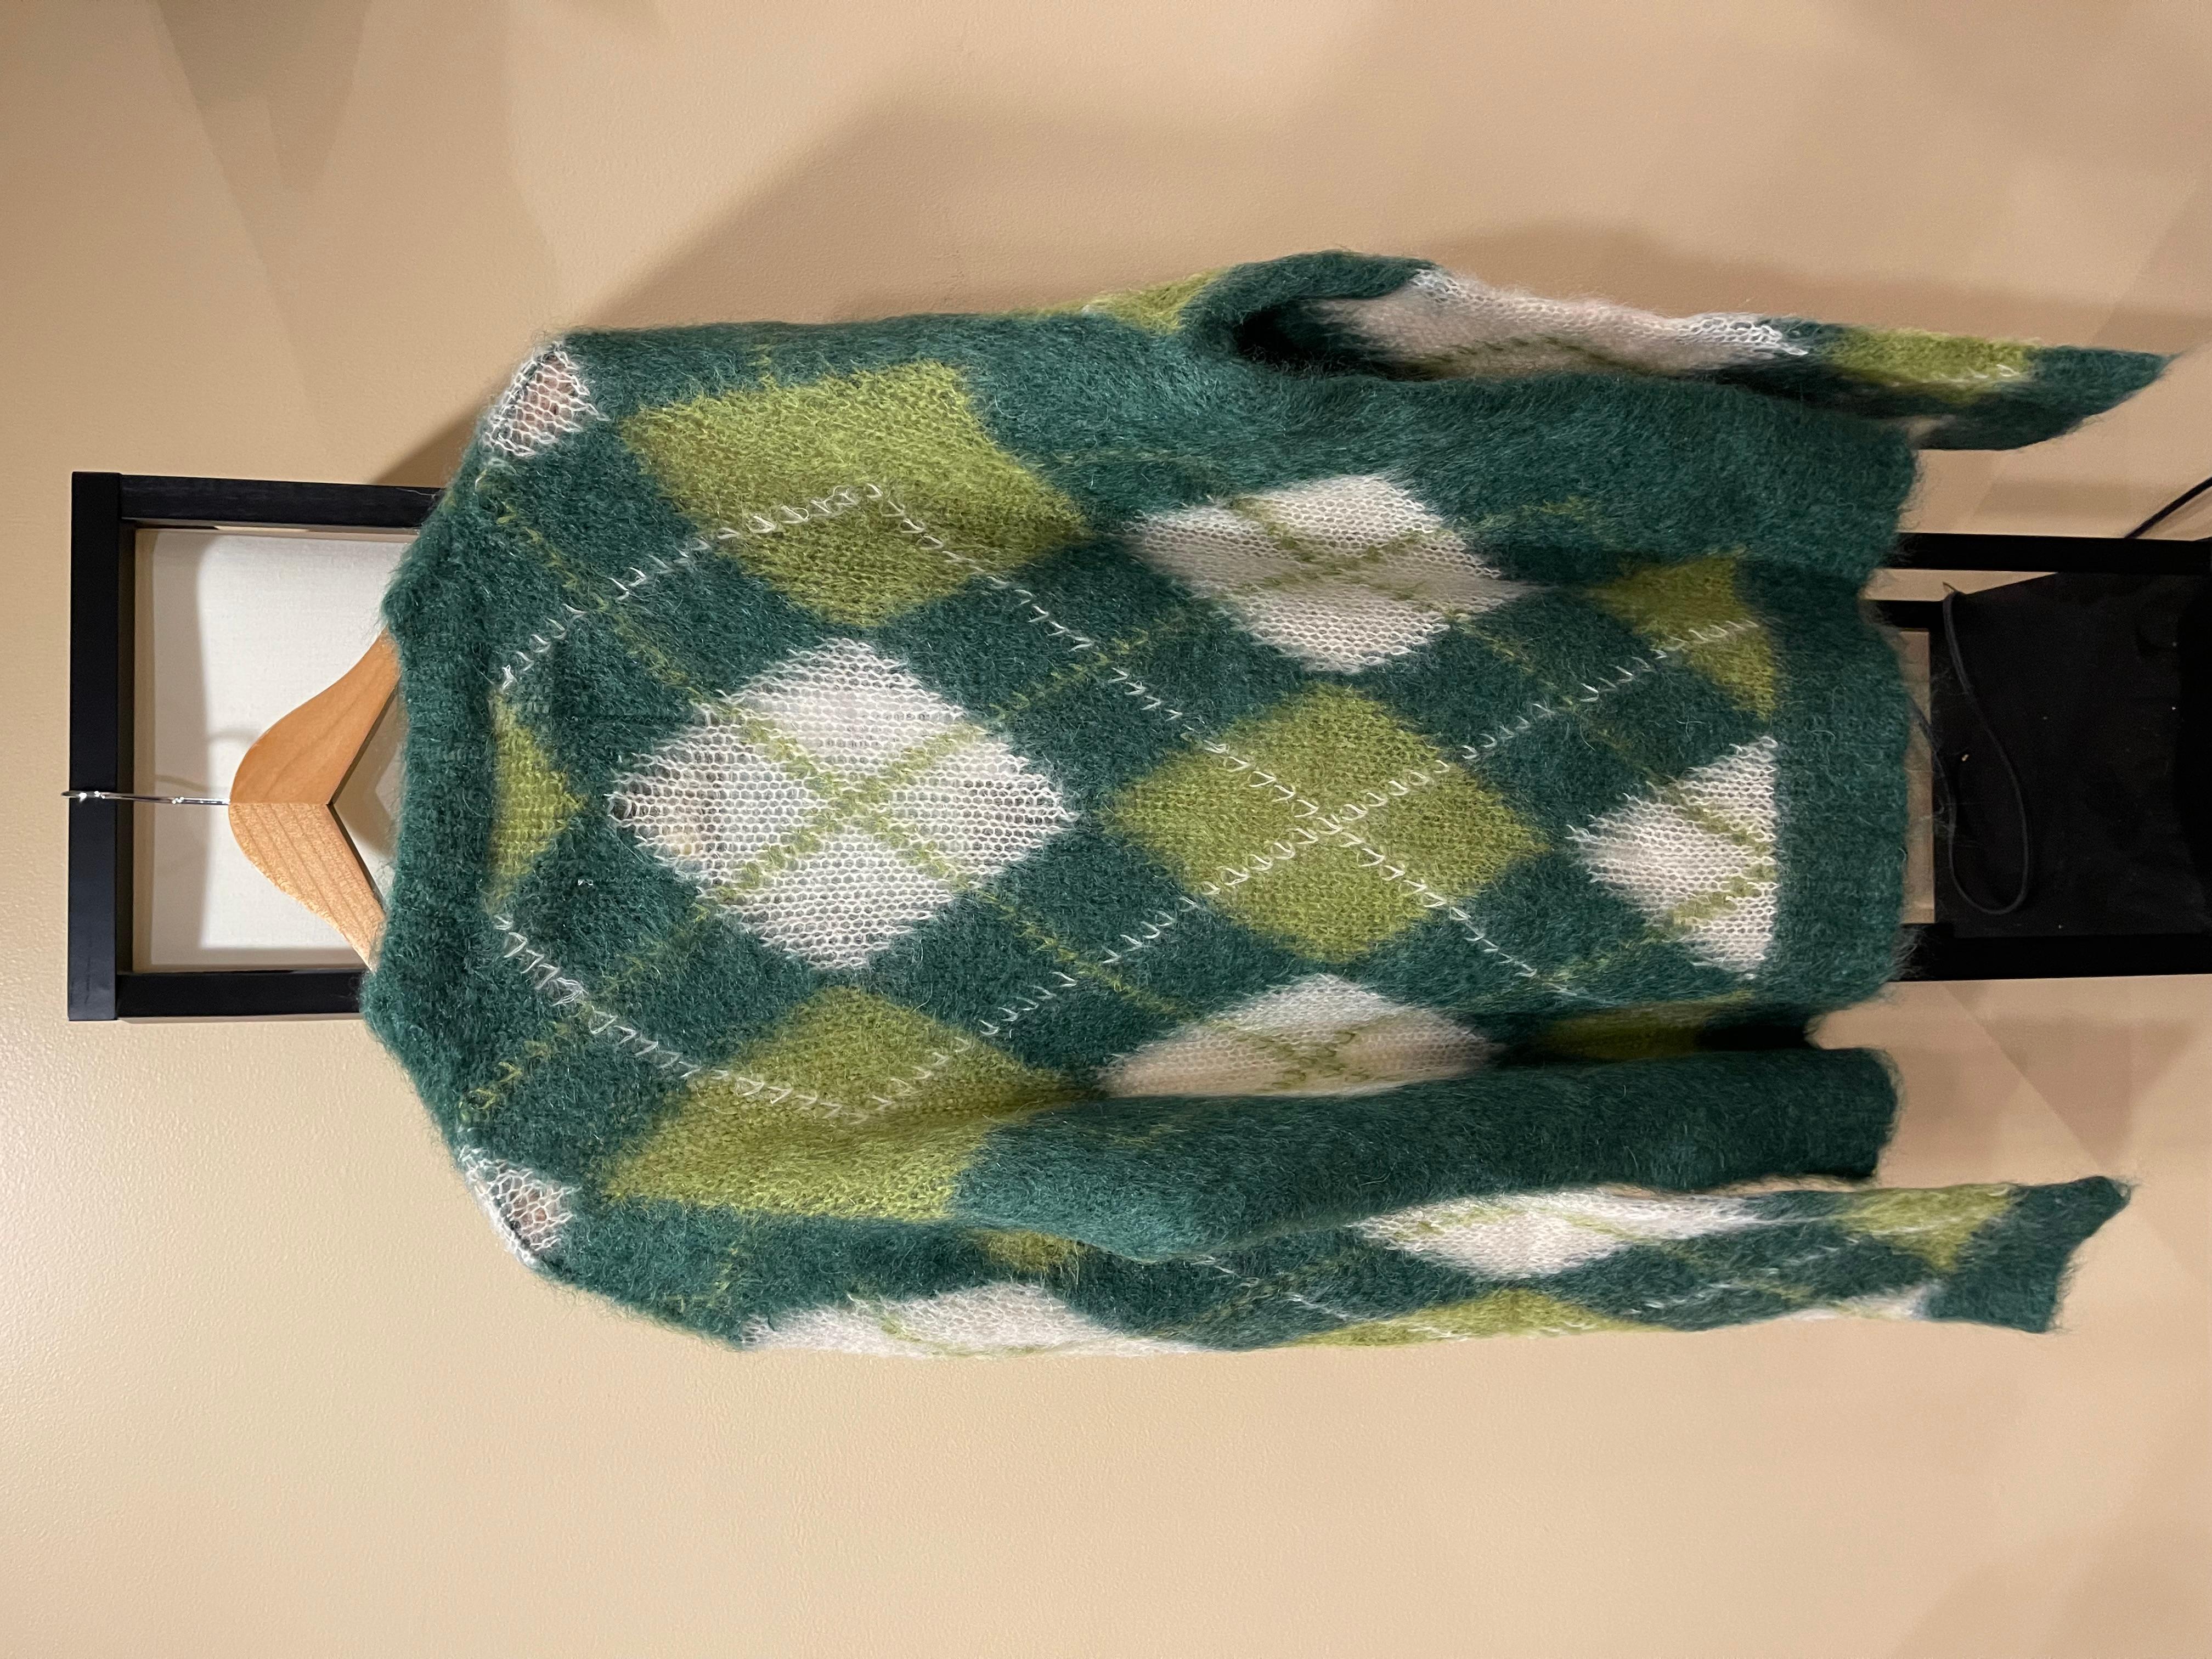 Marni Argyle Mohair-Blend Green Sweater
Size 52
Brand new w/ tags
Grail Marni piece


Measurements:

Chest: 25”
Length: 28”
Shoulders: 22”
Sleeve length: 28”

All sales are final.